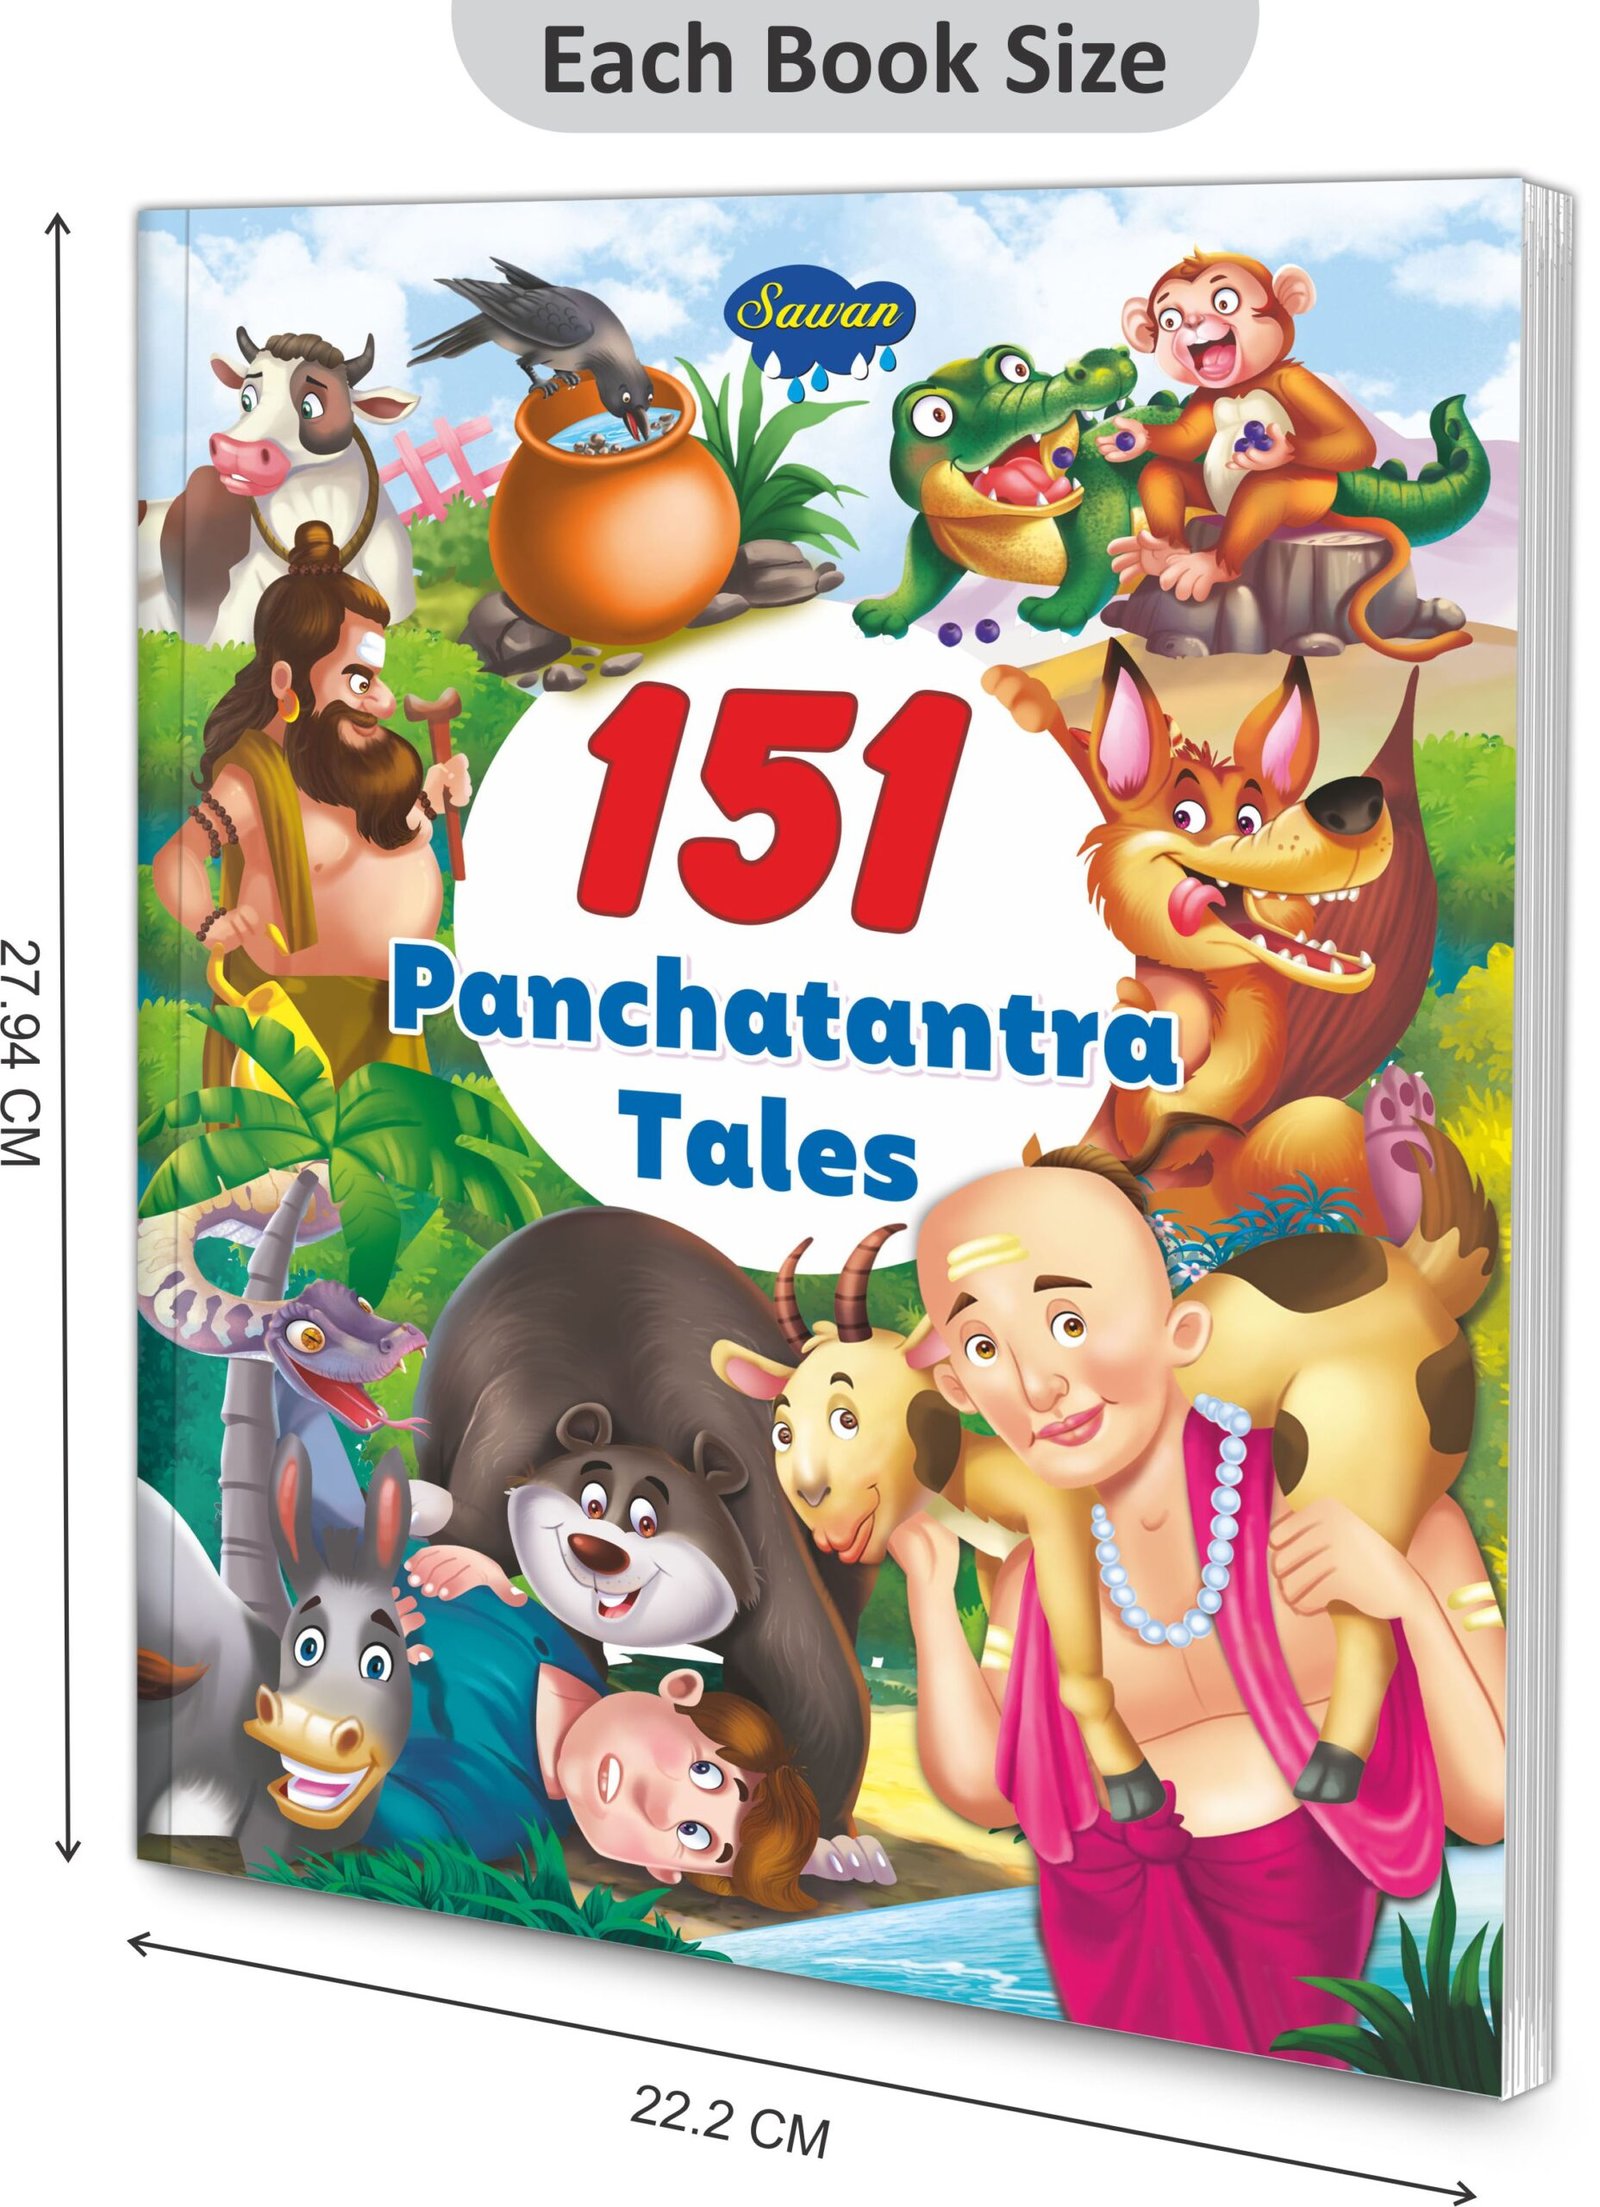 book review on panchatantra